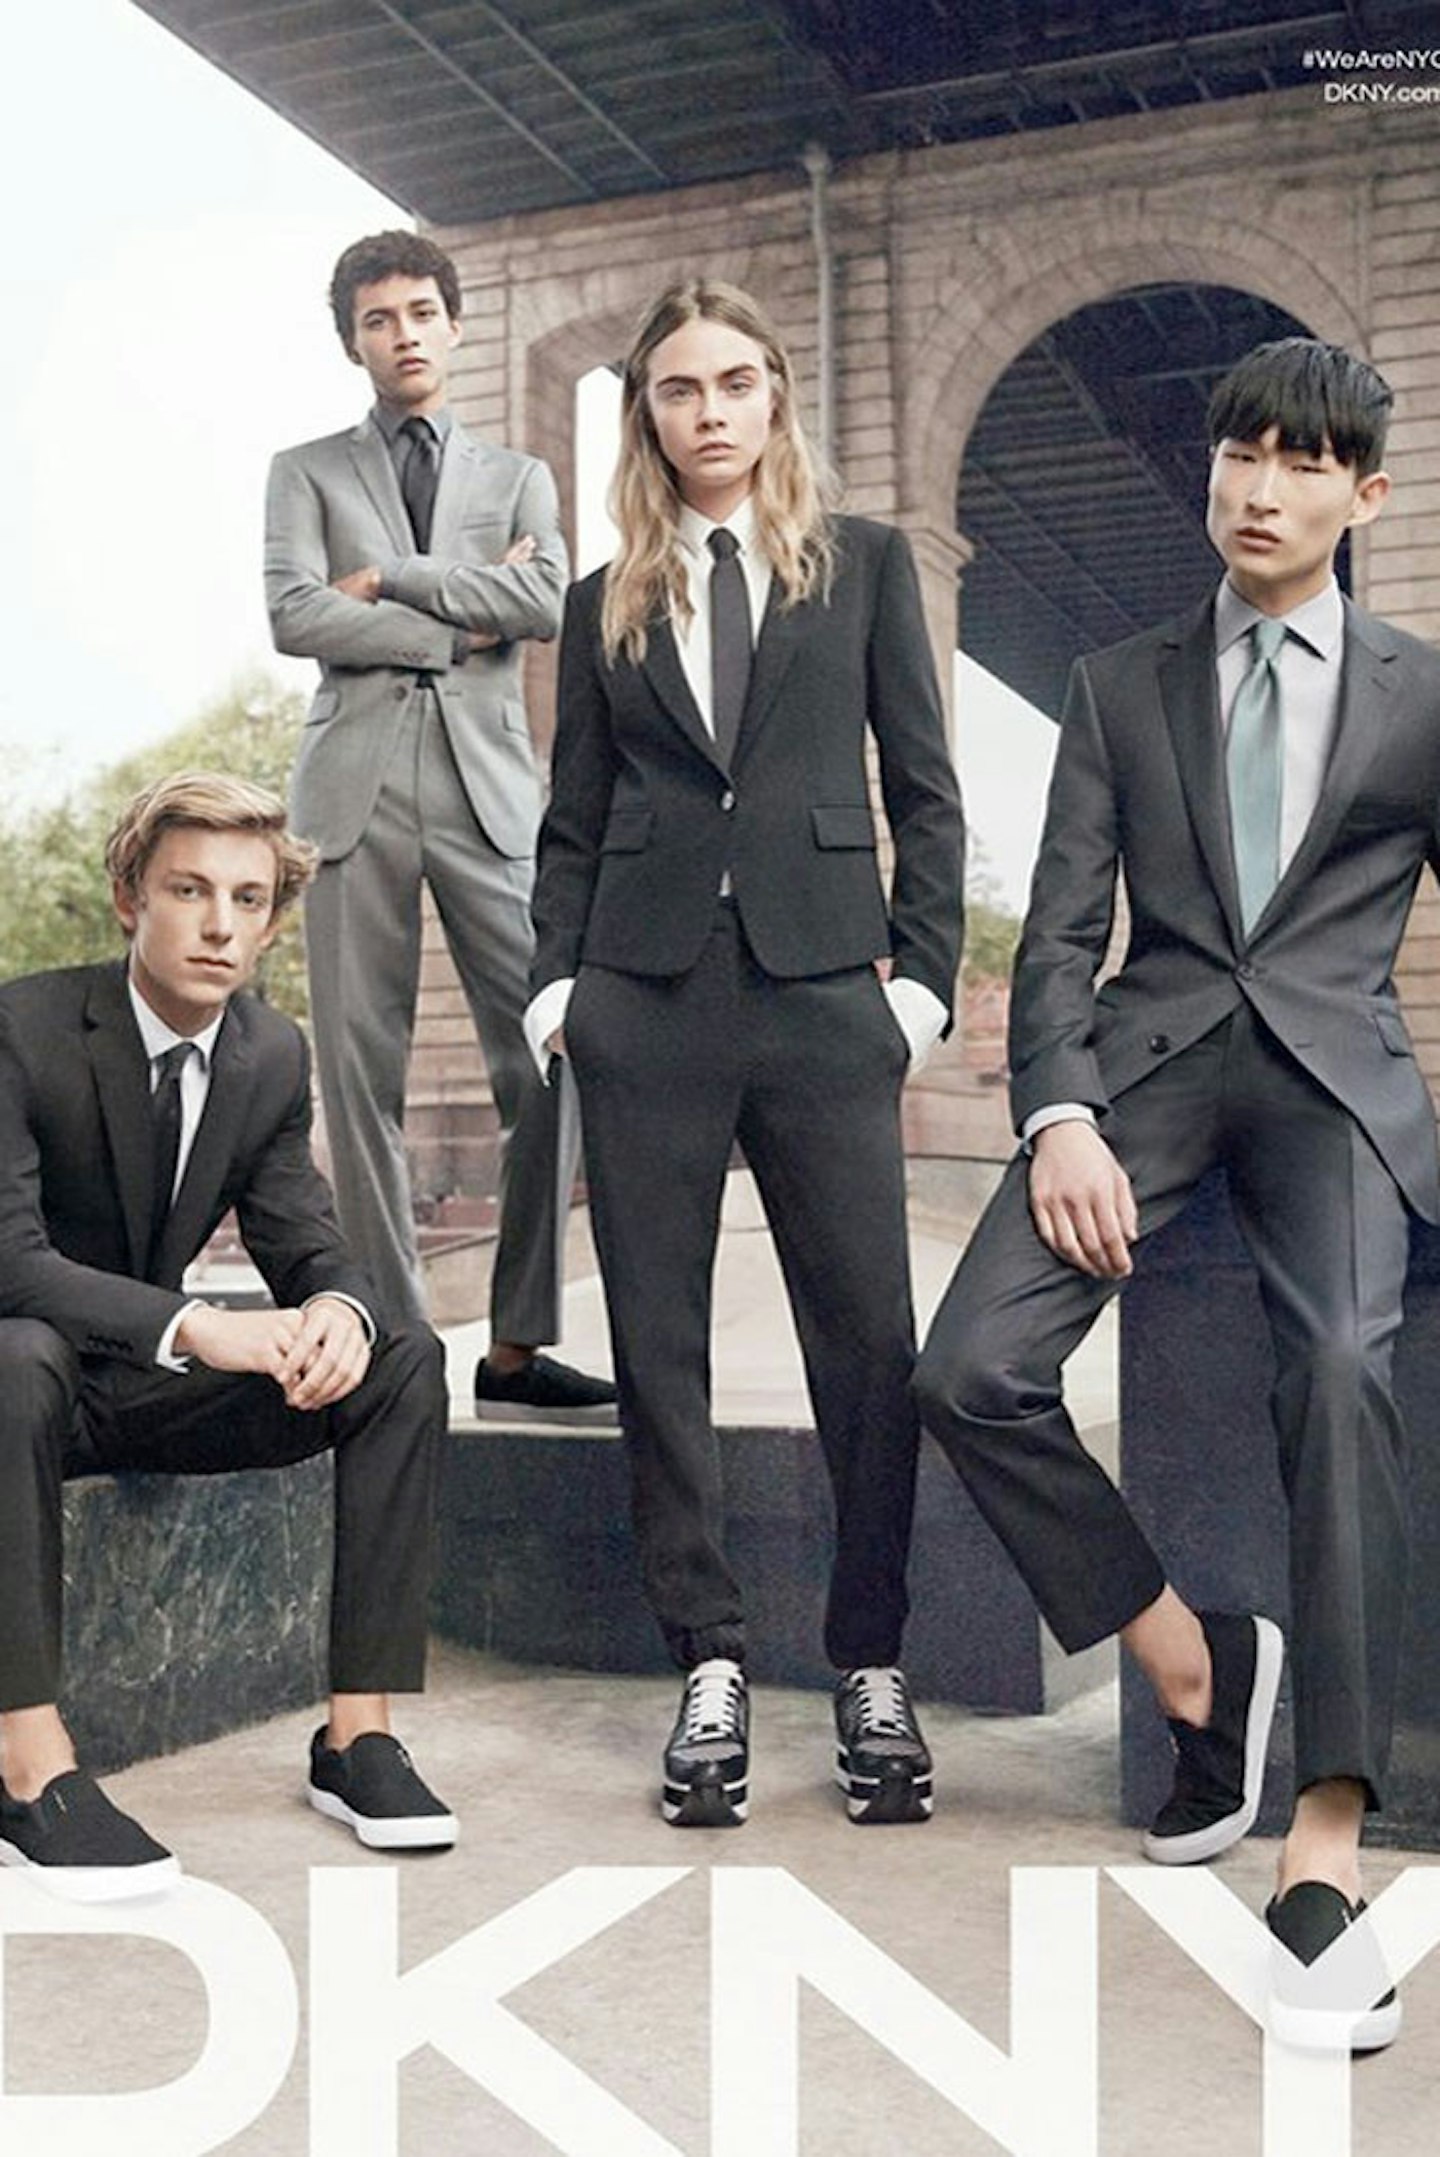 Cara Deleveingne suits up in DKNY's SS15 campaign